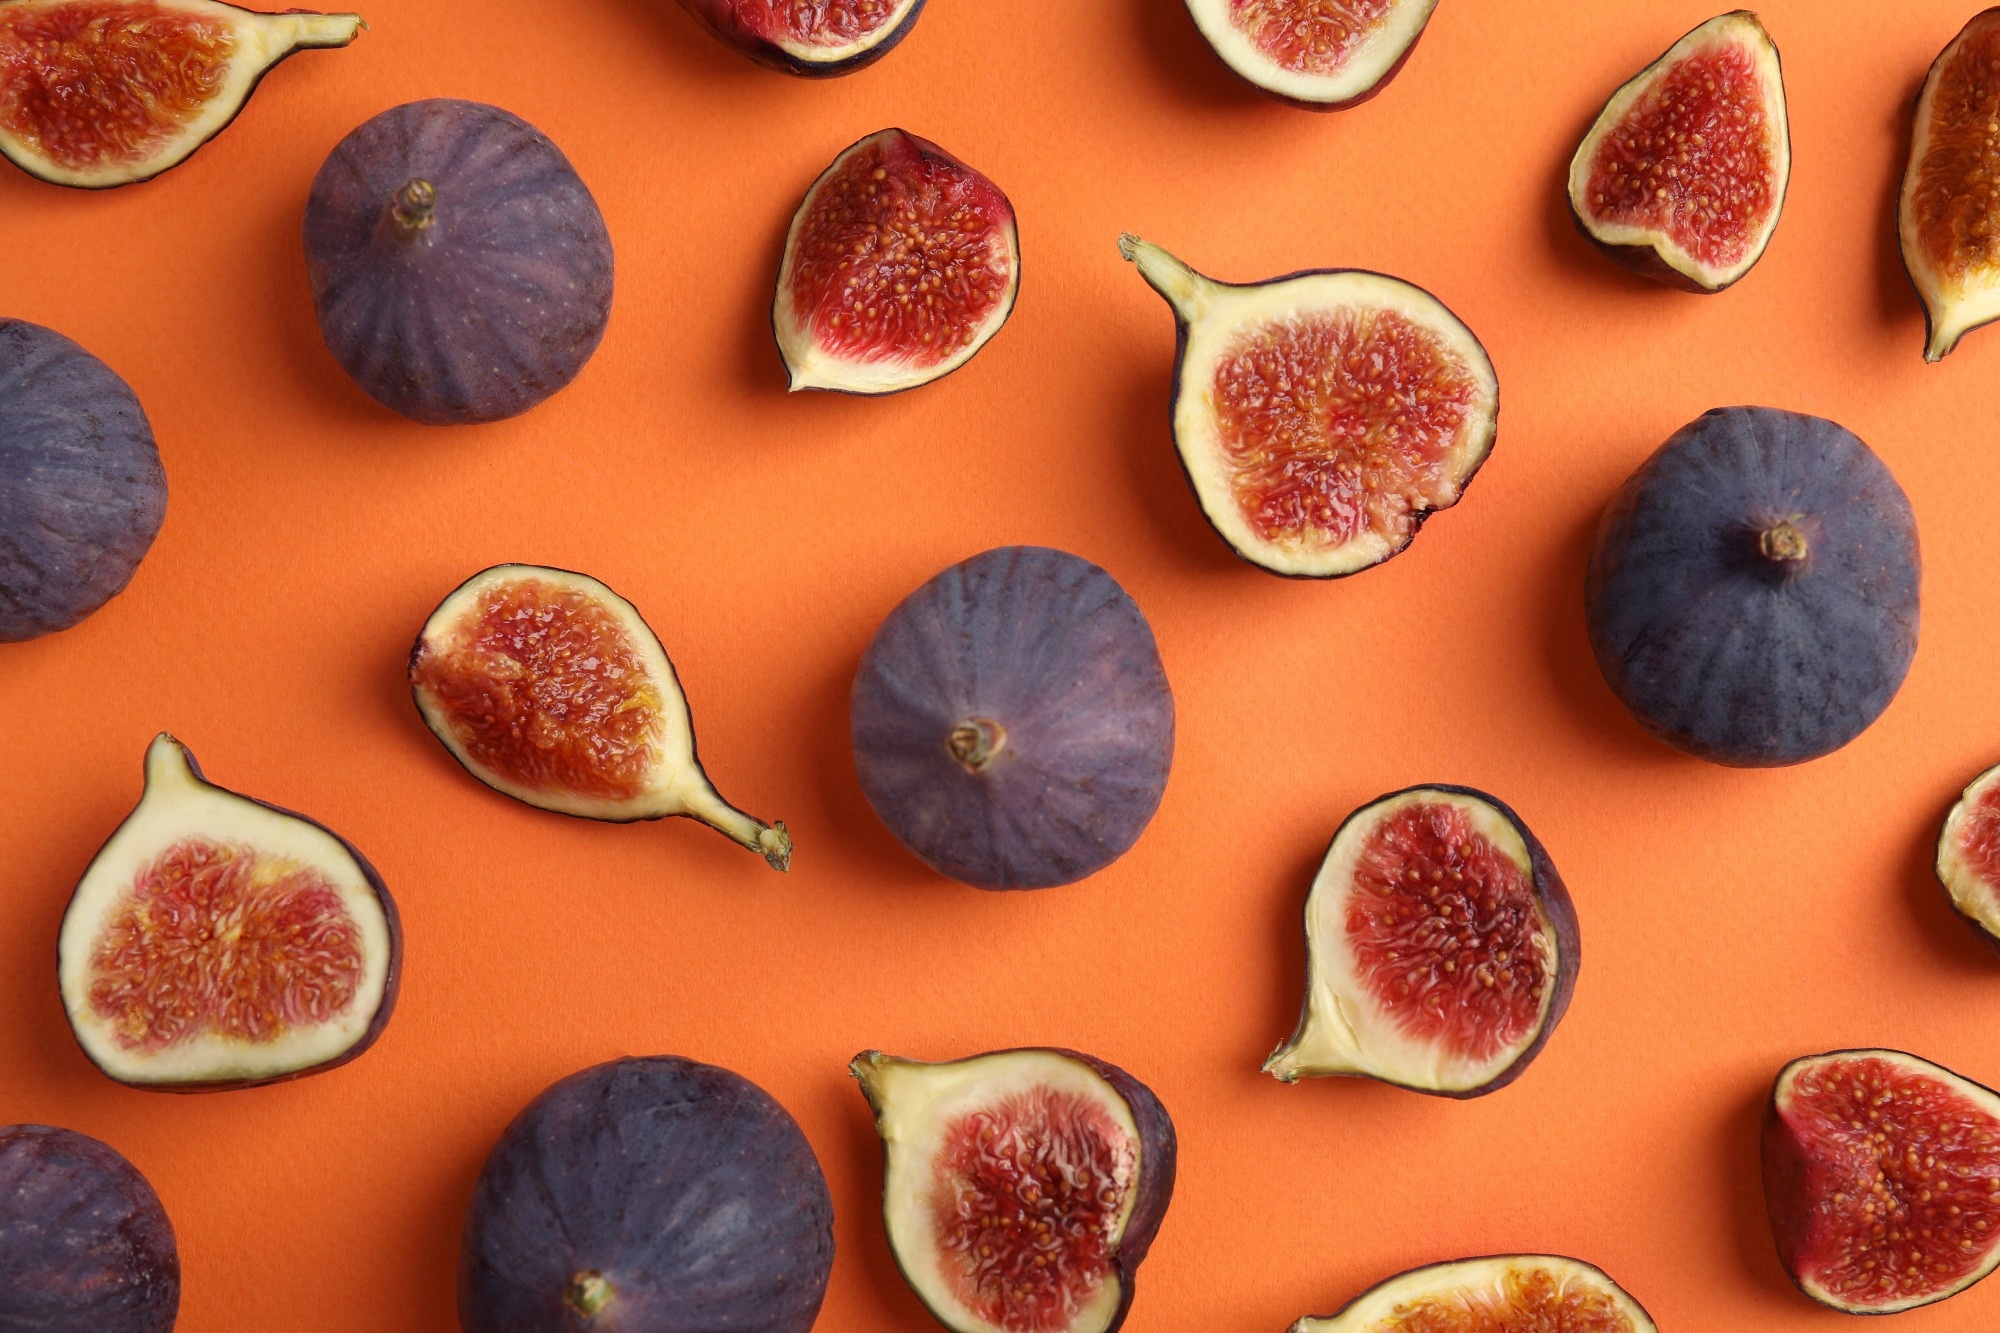 Study: Phytochemical Composition and Health Benefits of Figs (Fresh and Dried): A Review of Literature from 2000 to 2022. Image Credit: NewAfrica/Shutterstock.com